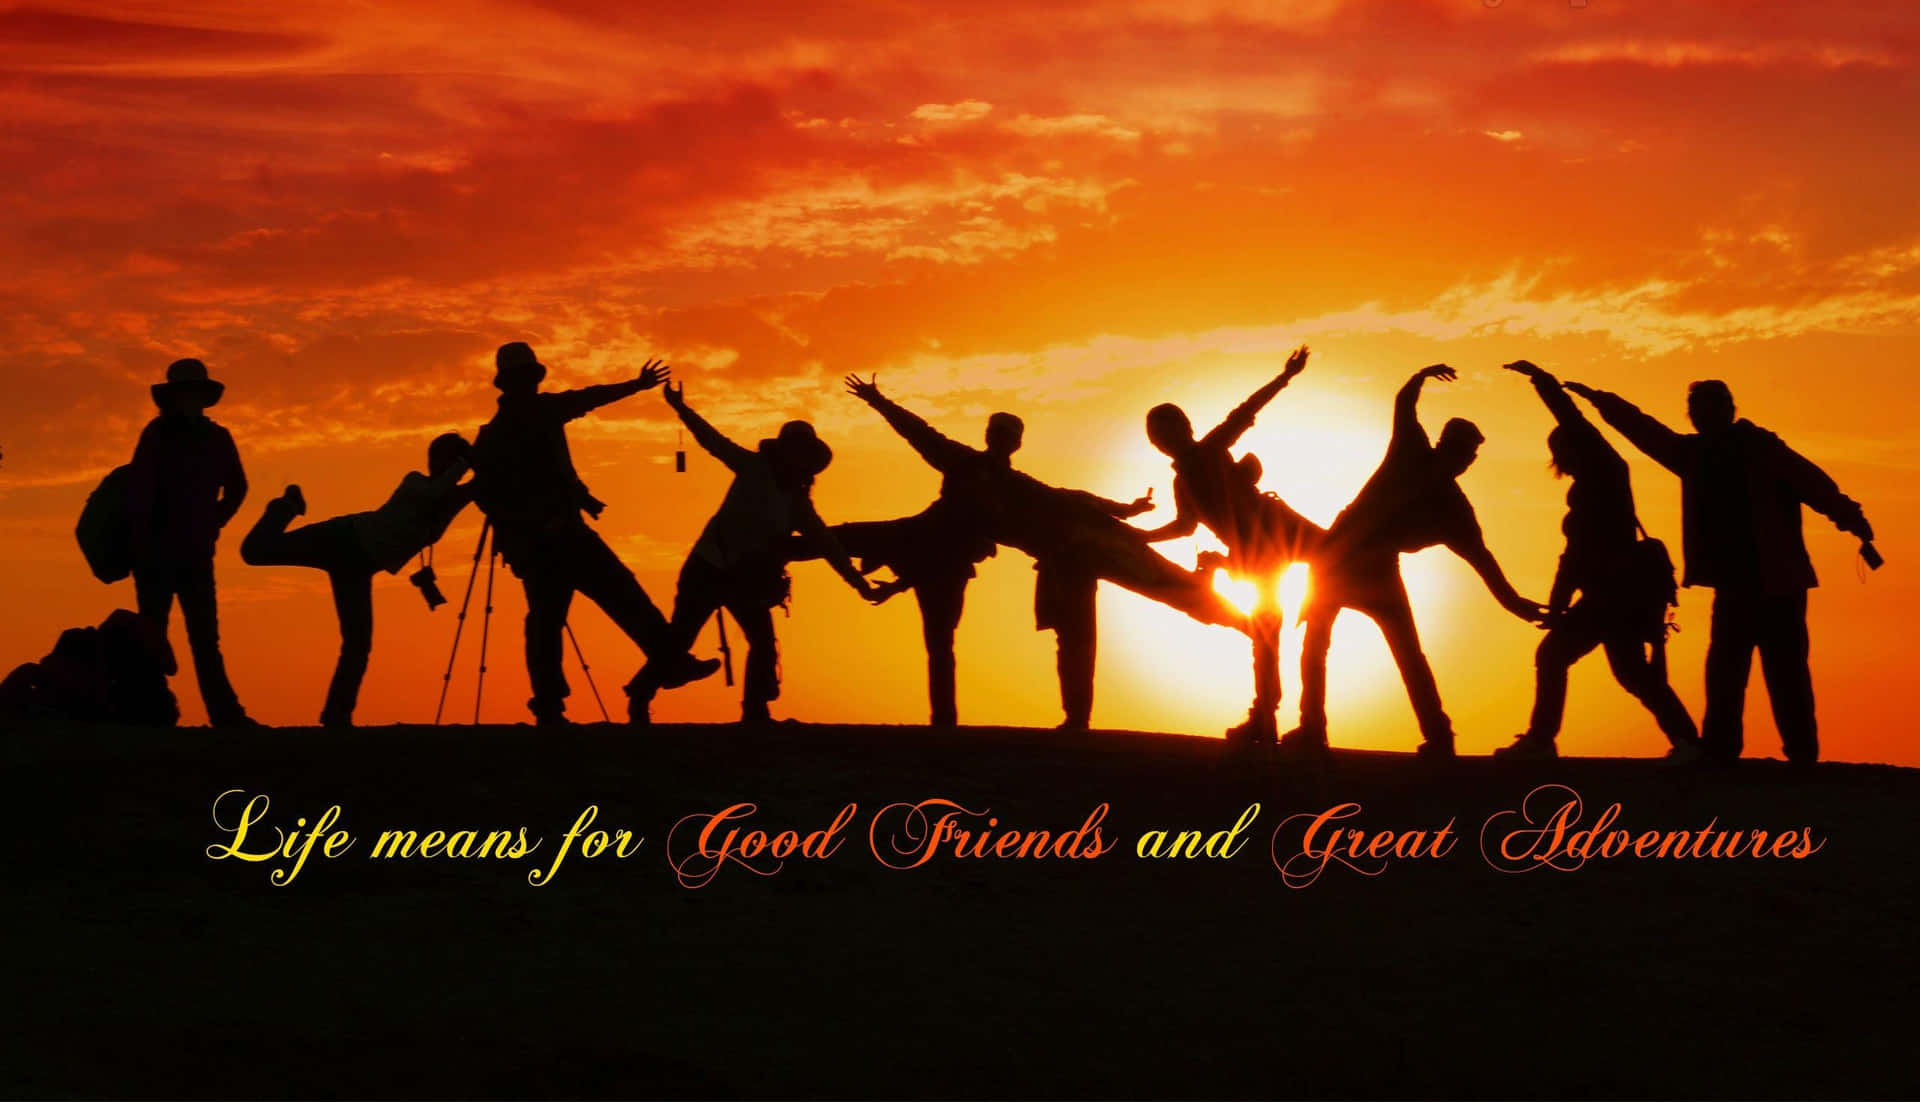 Friendship Posing Under Sunset Picture